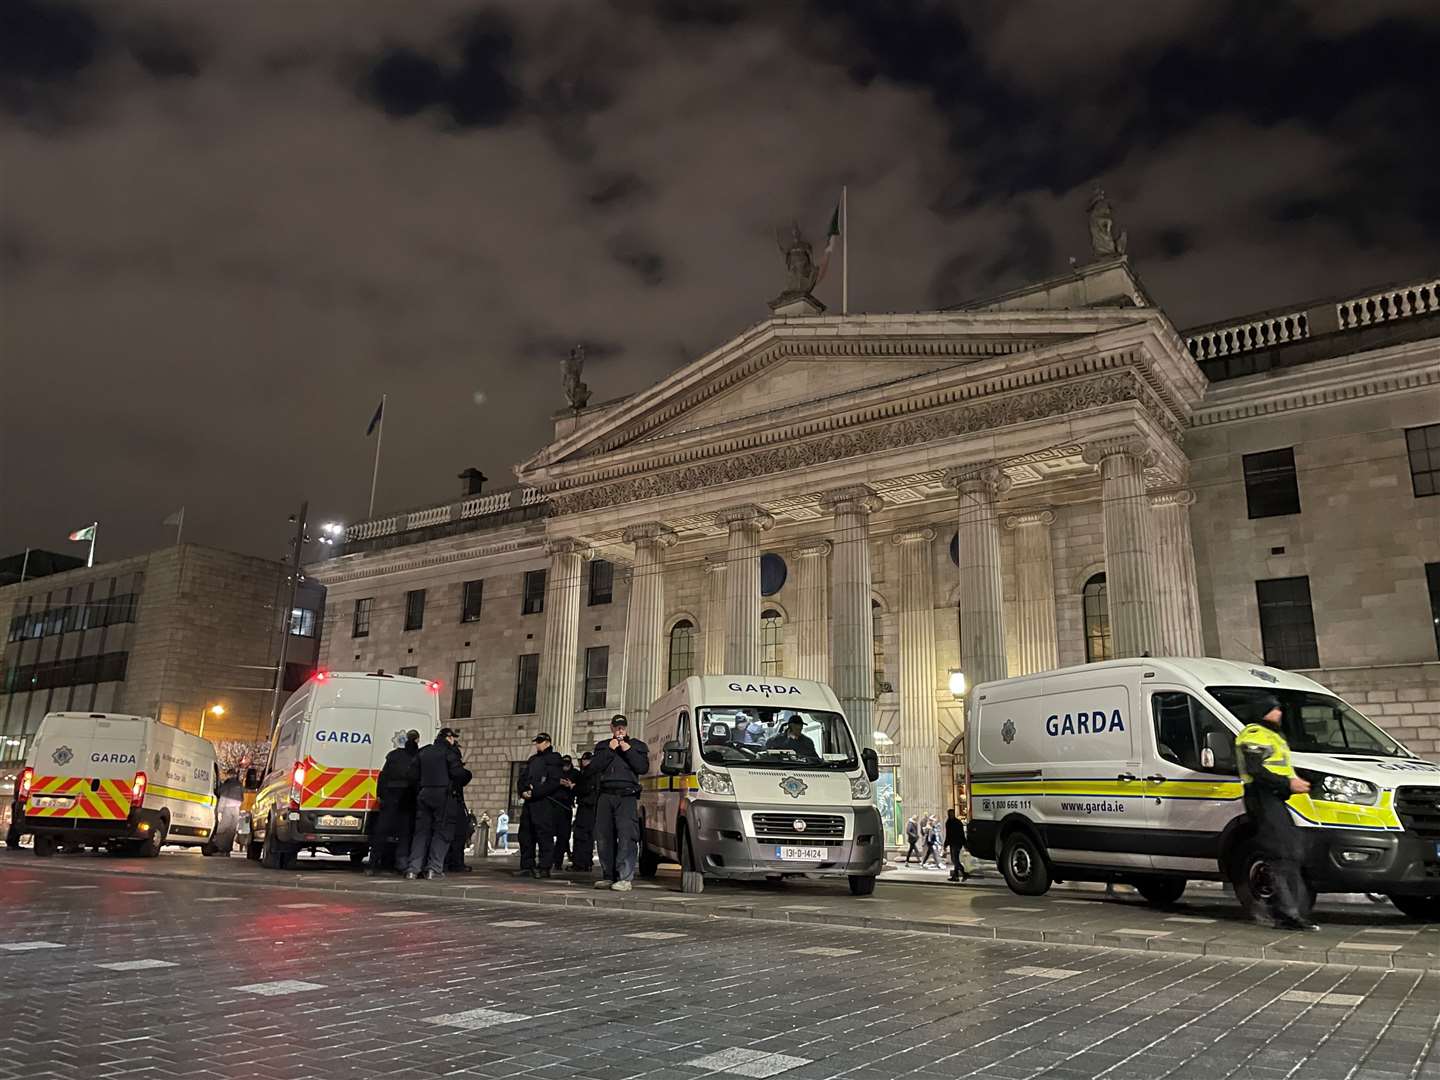 Garda outside the General Post Office on O’Connell Street in Dublin following violent scenes in the city centre on Thursday evening (David Young/PA)